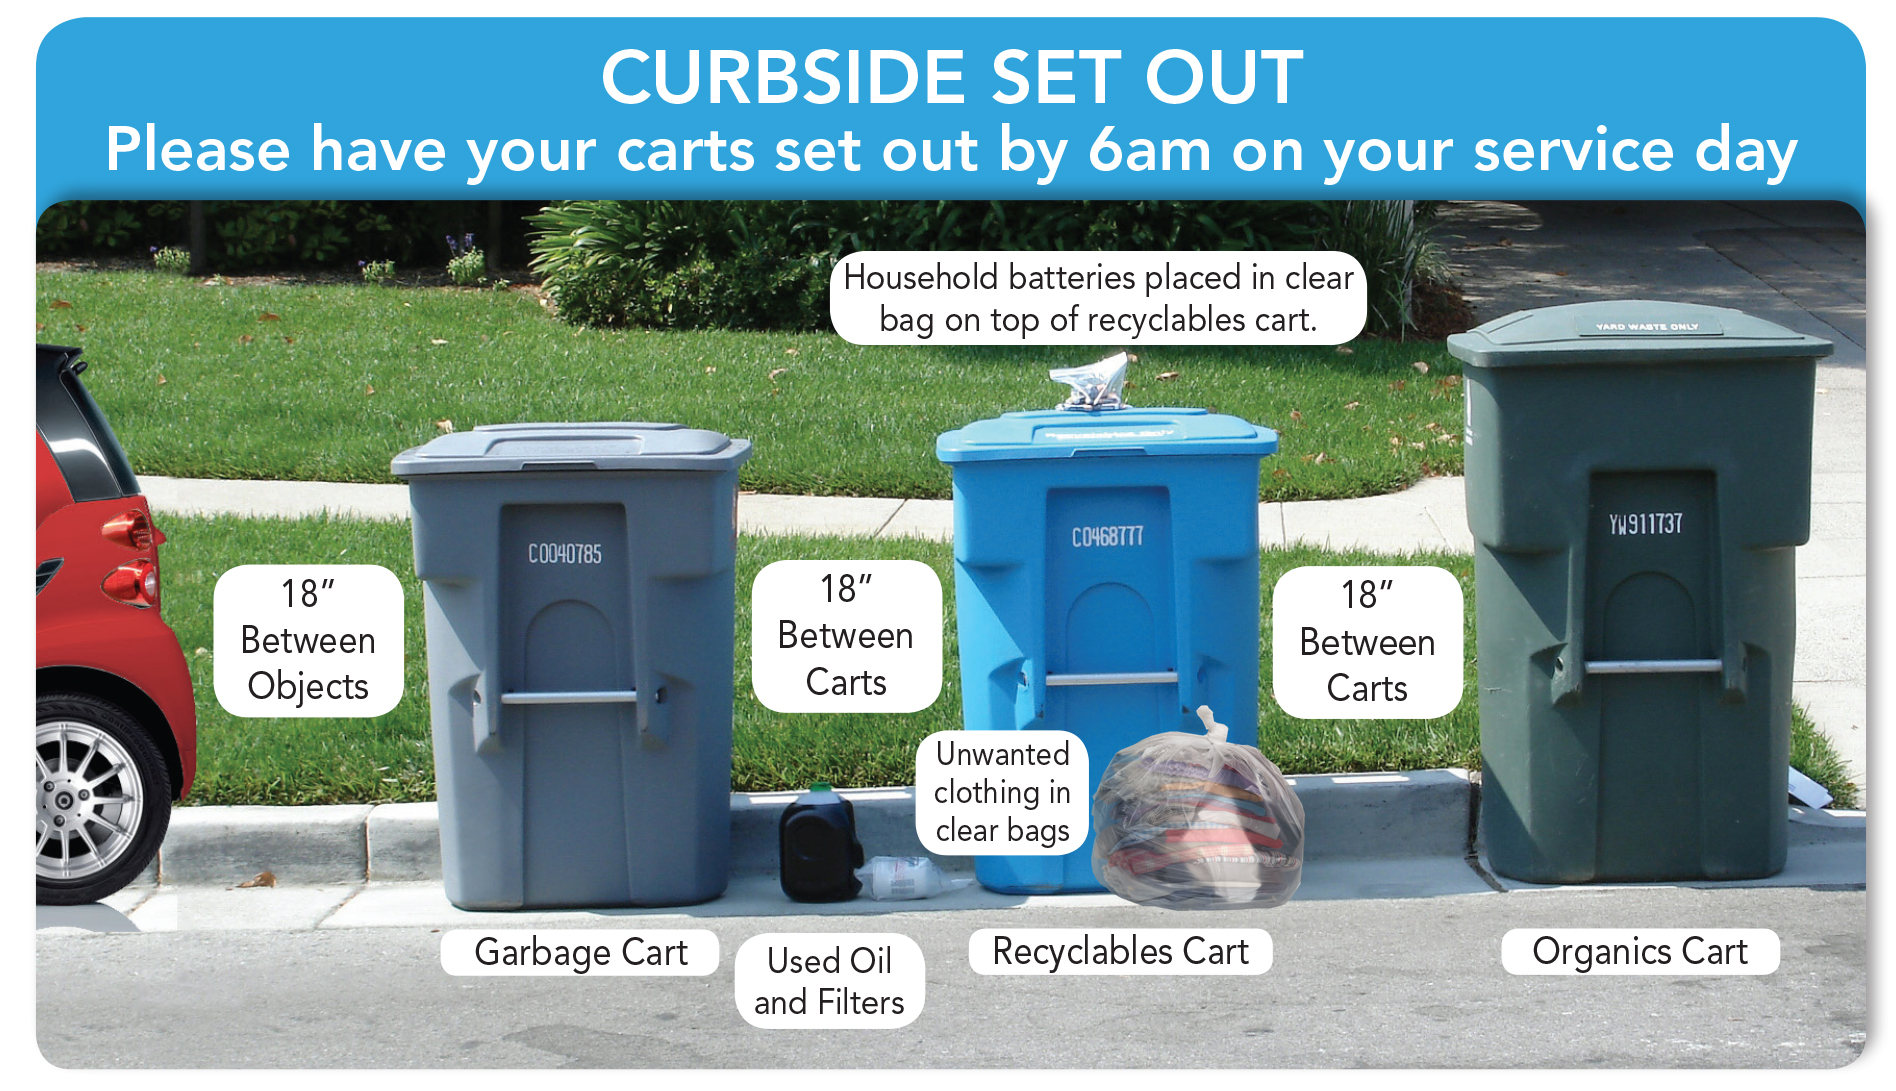 Curbside Services: Blue Cart